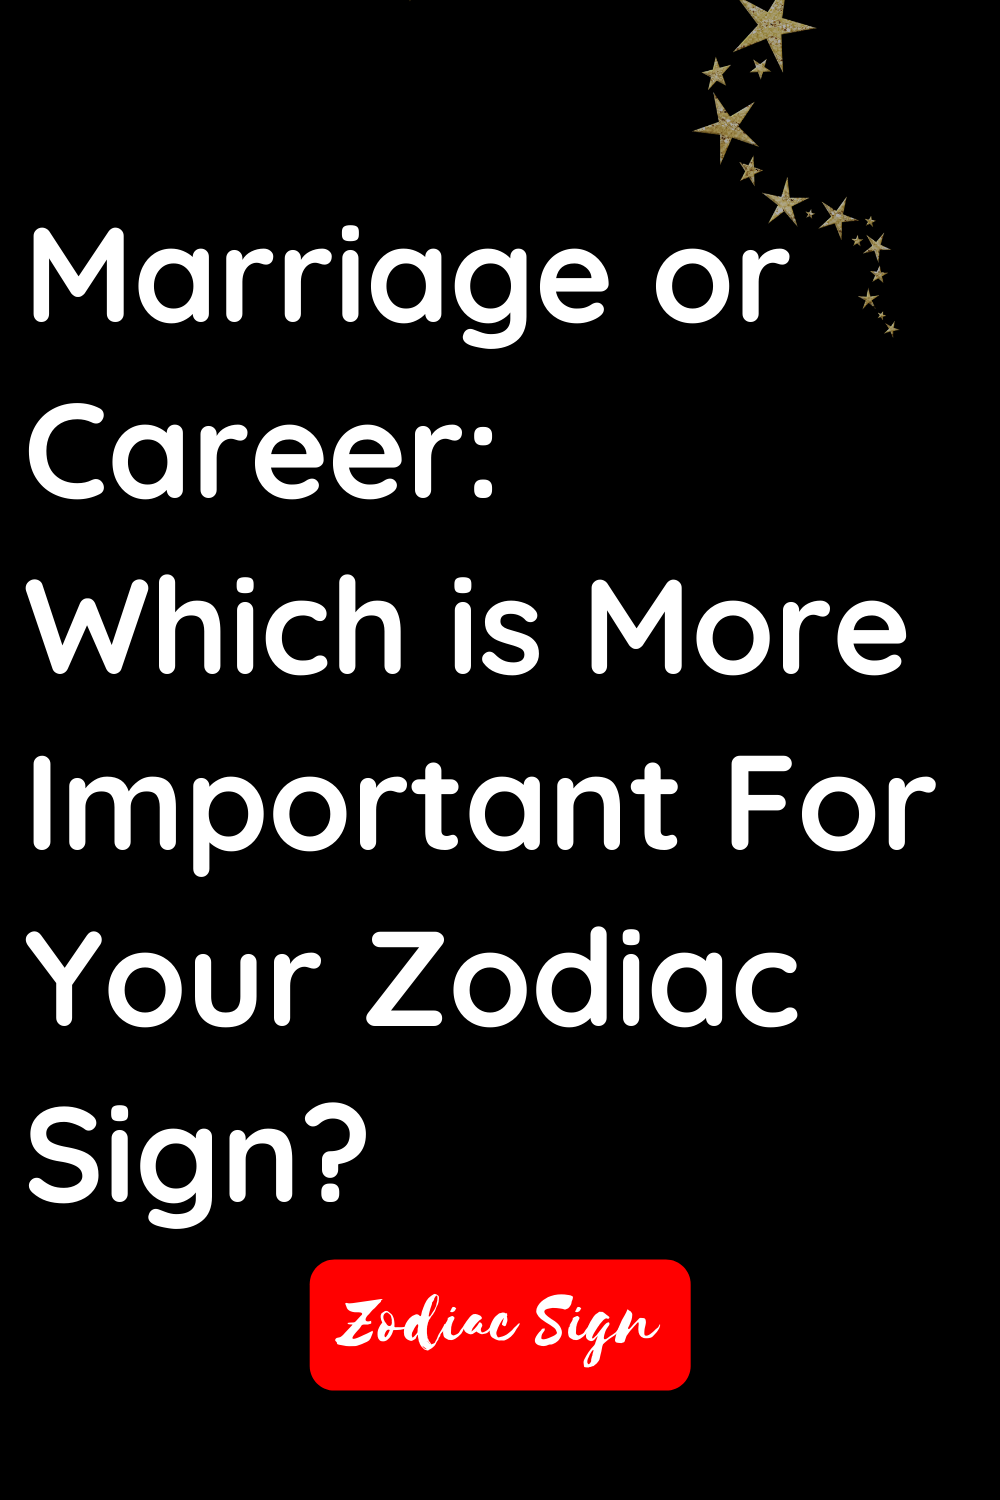 Marriage or career: Which is more important for your zodiac sign?